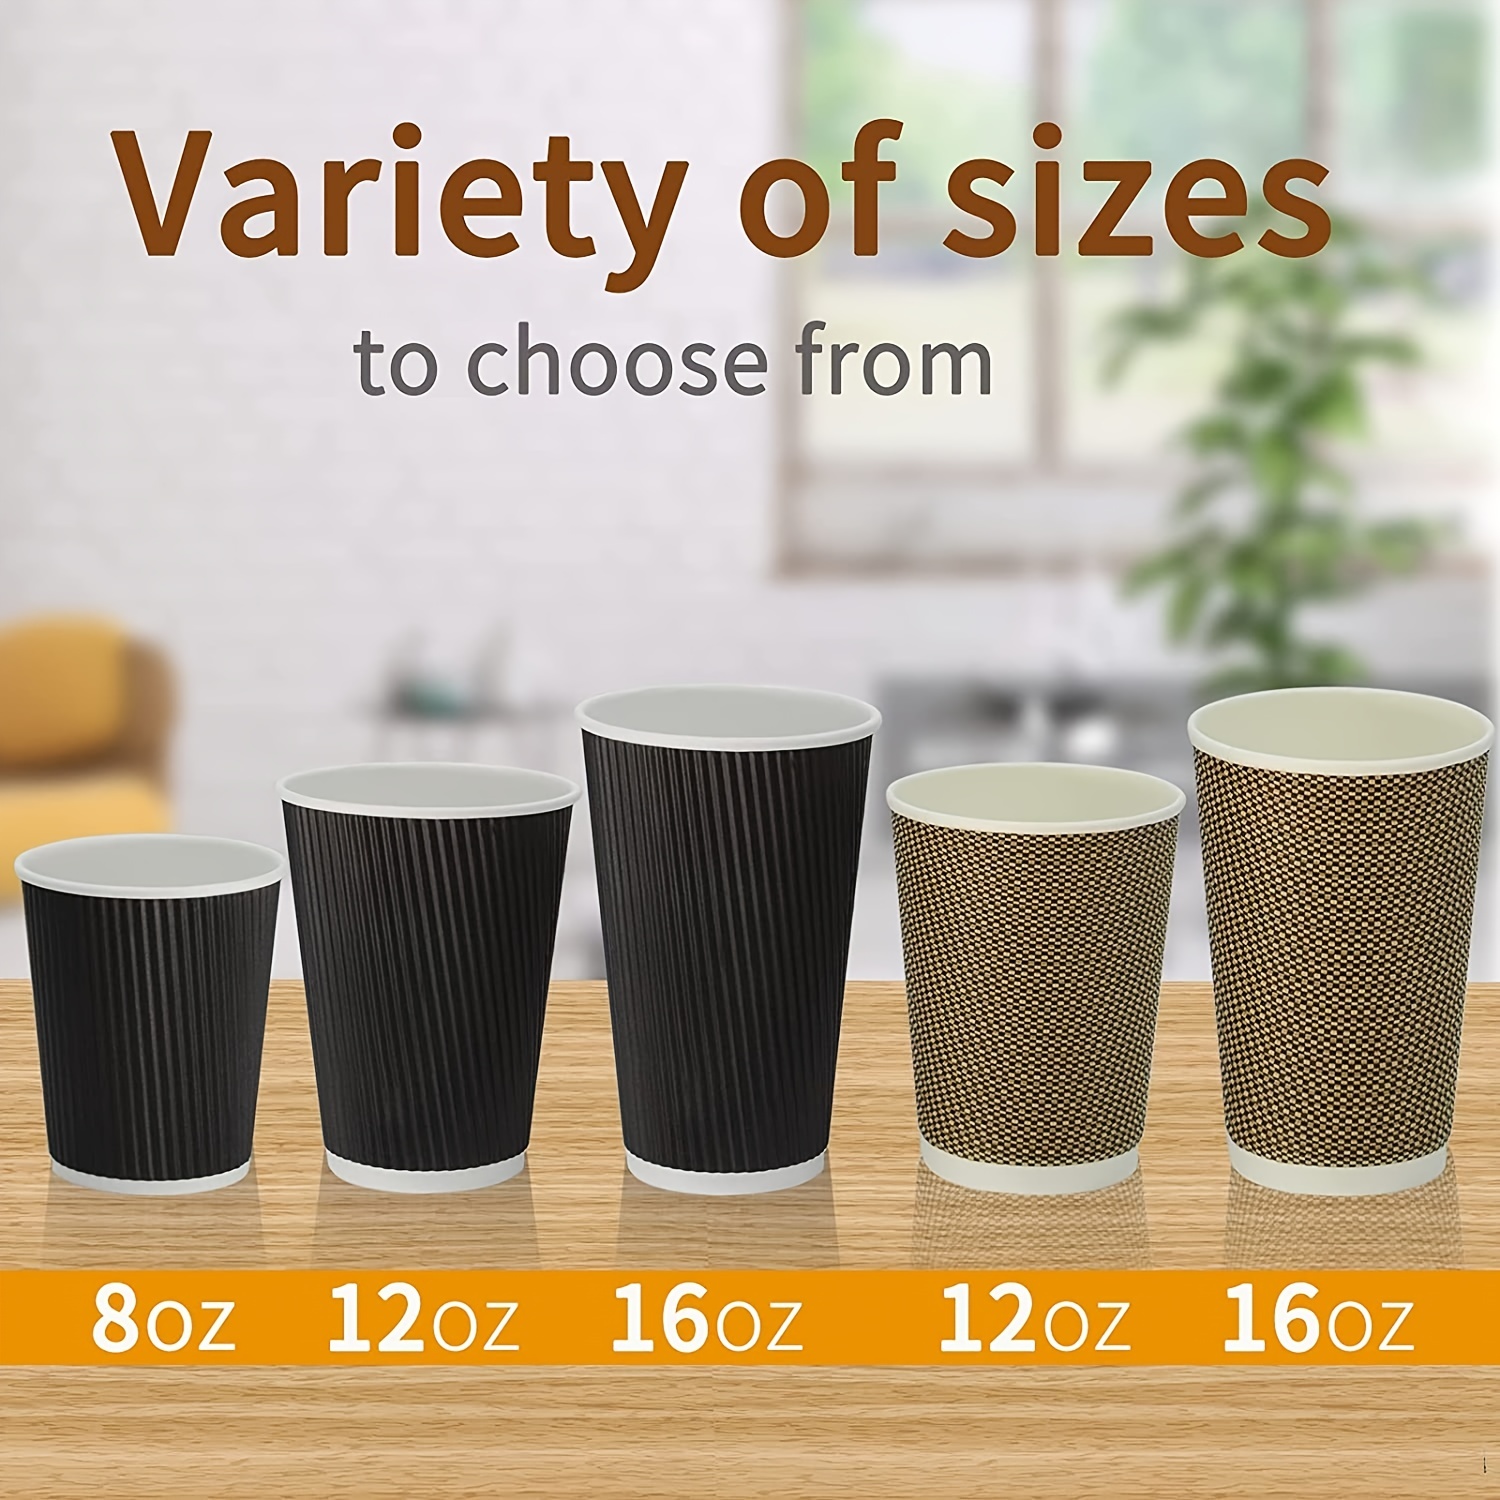 THE PARTY CUP - 16 oz. Double Wall Insulated Party Plastic Cup